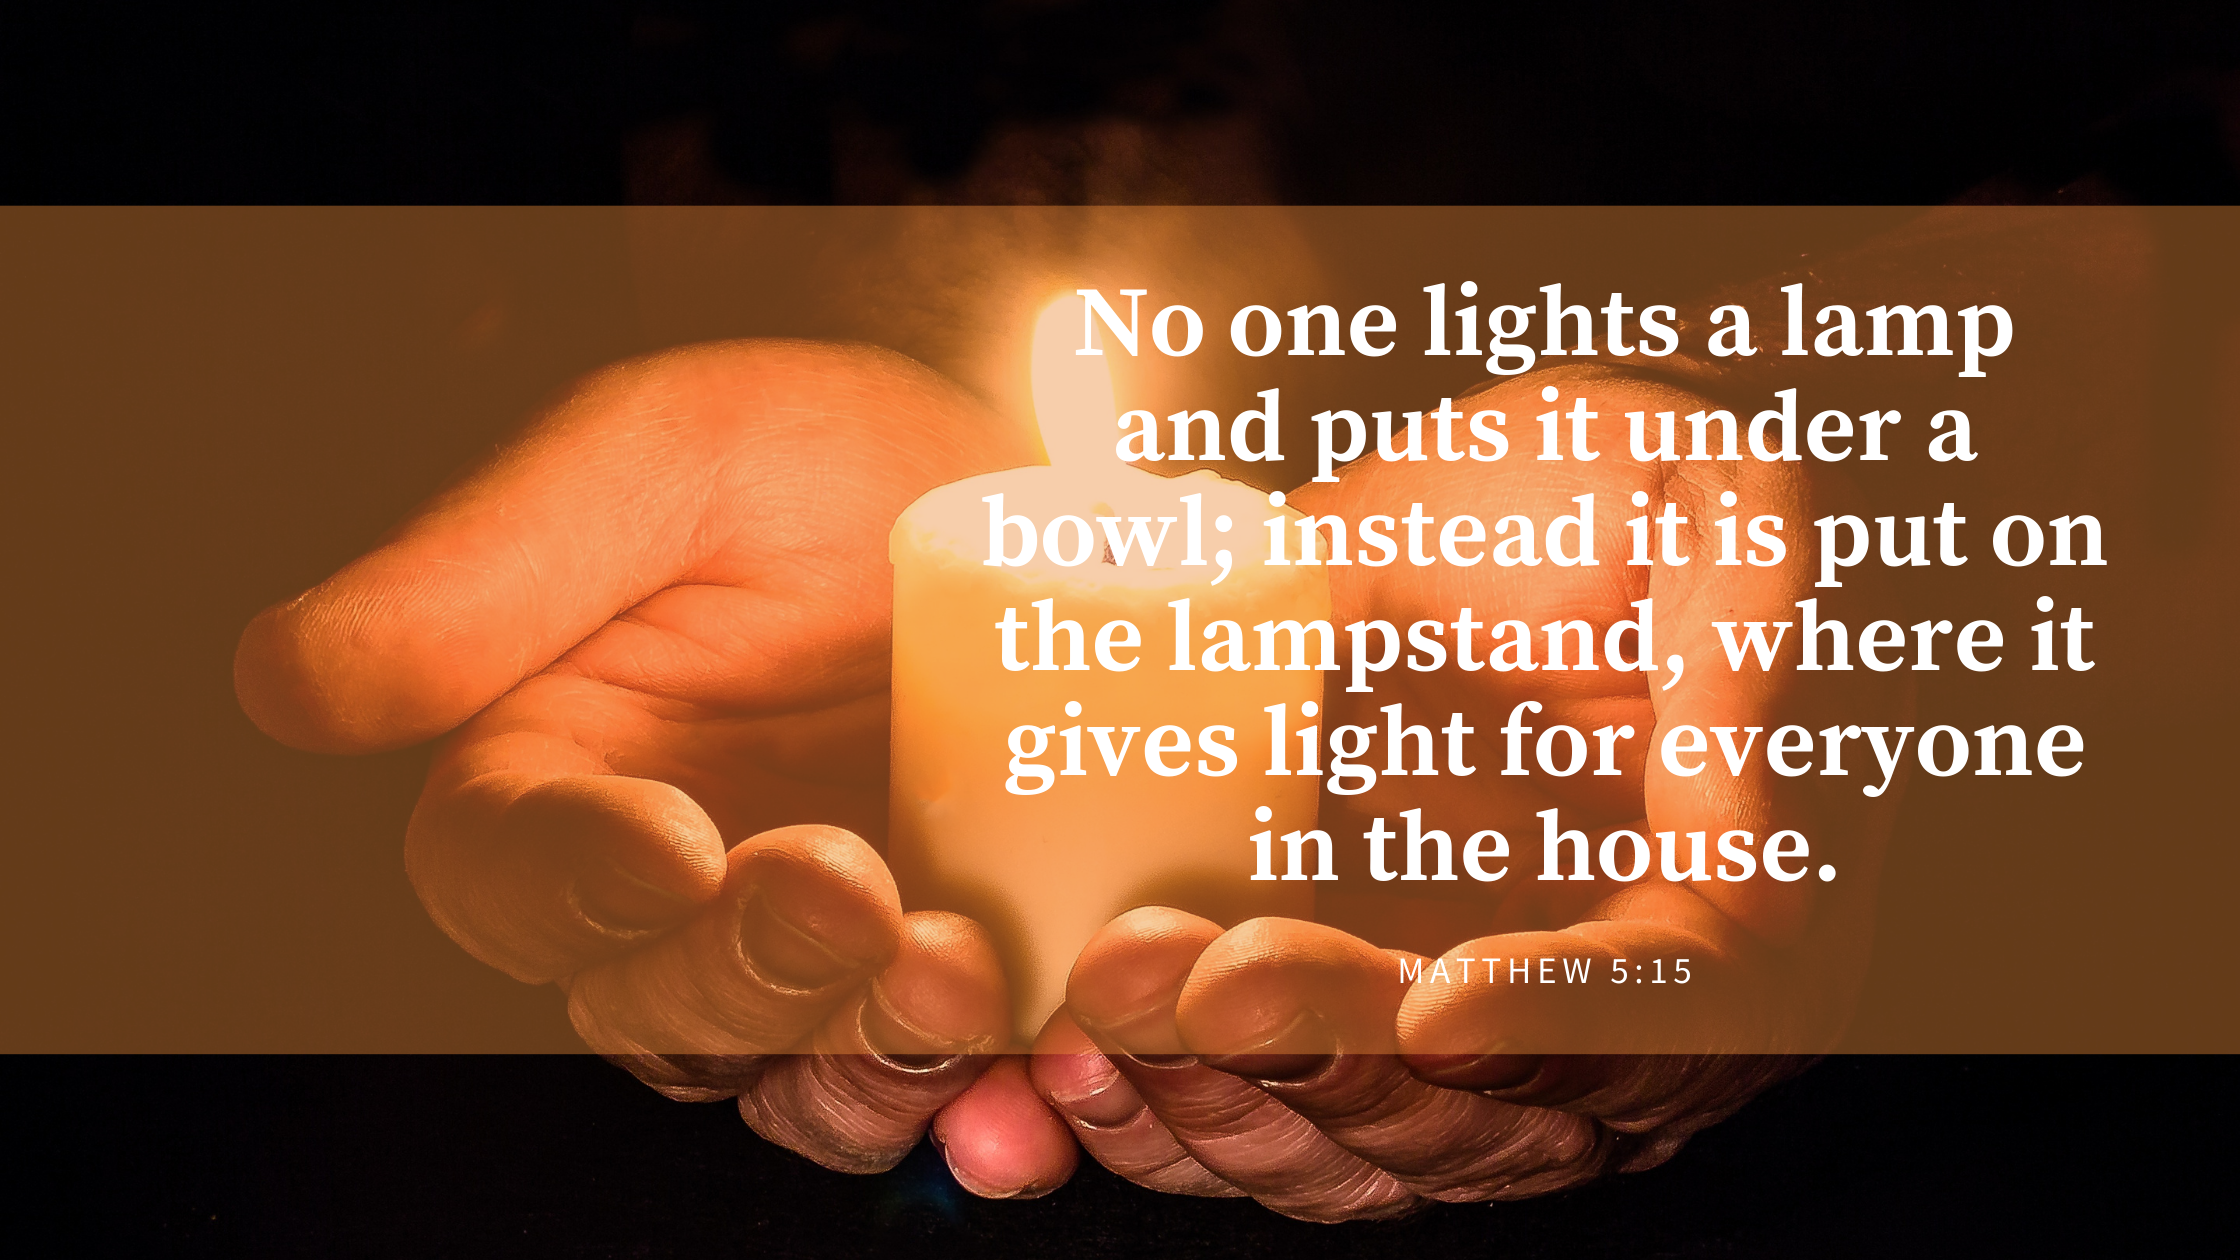 No one lights a lamp and puts it under a bowl; instead it is put on the lampstand, where it gives light for everyone in the house.